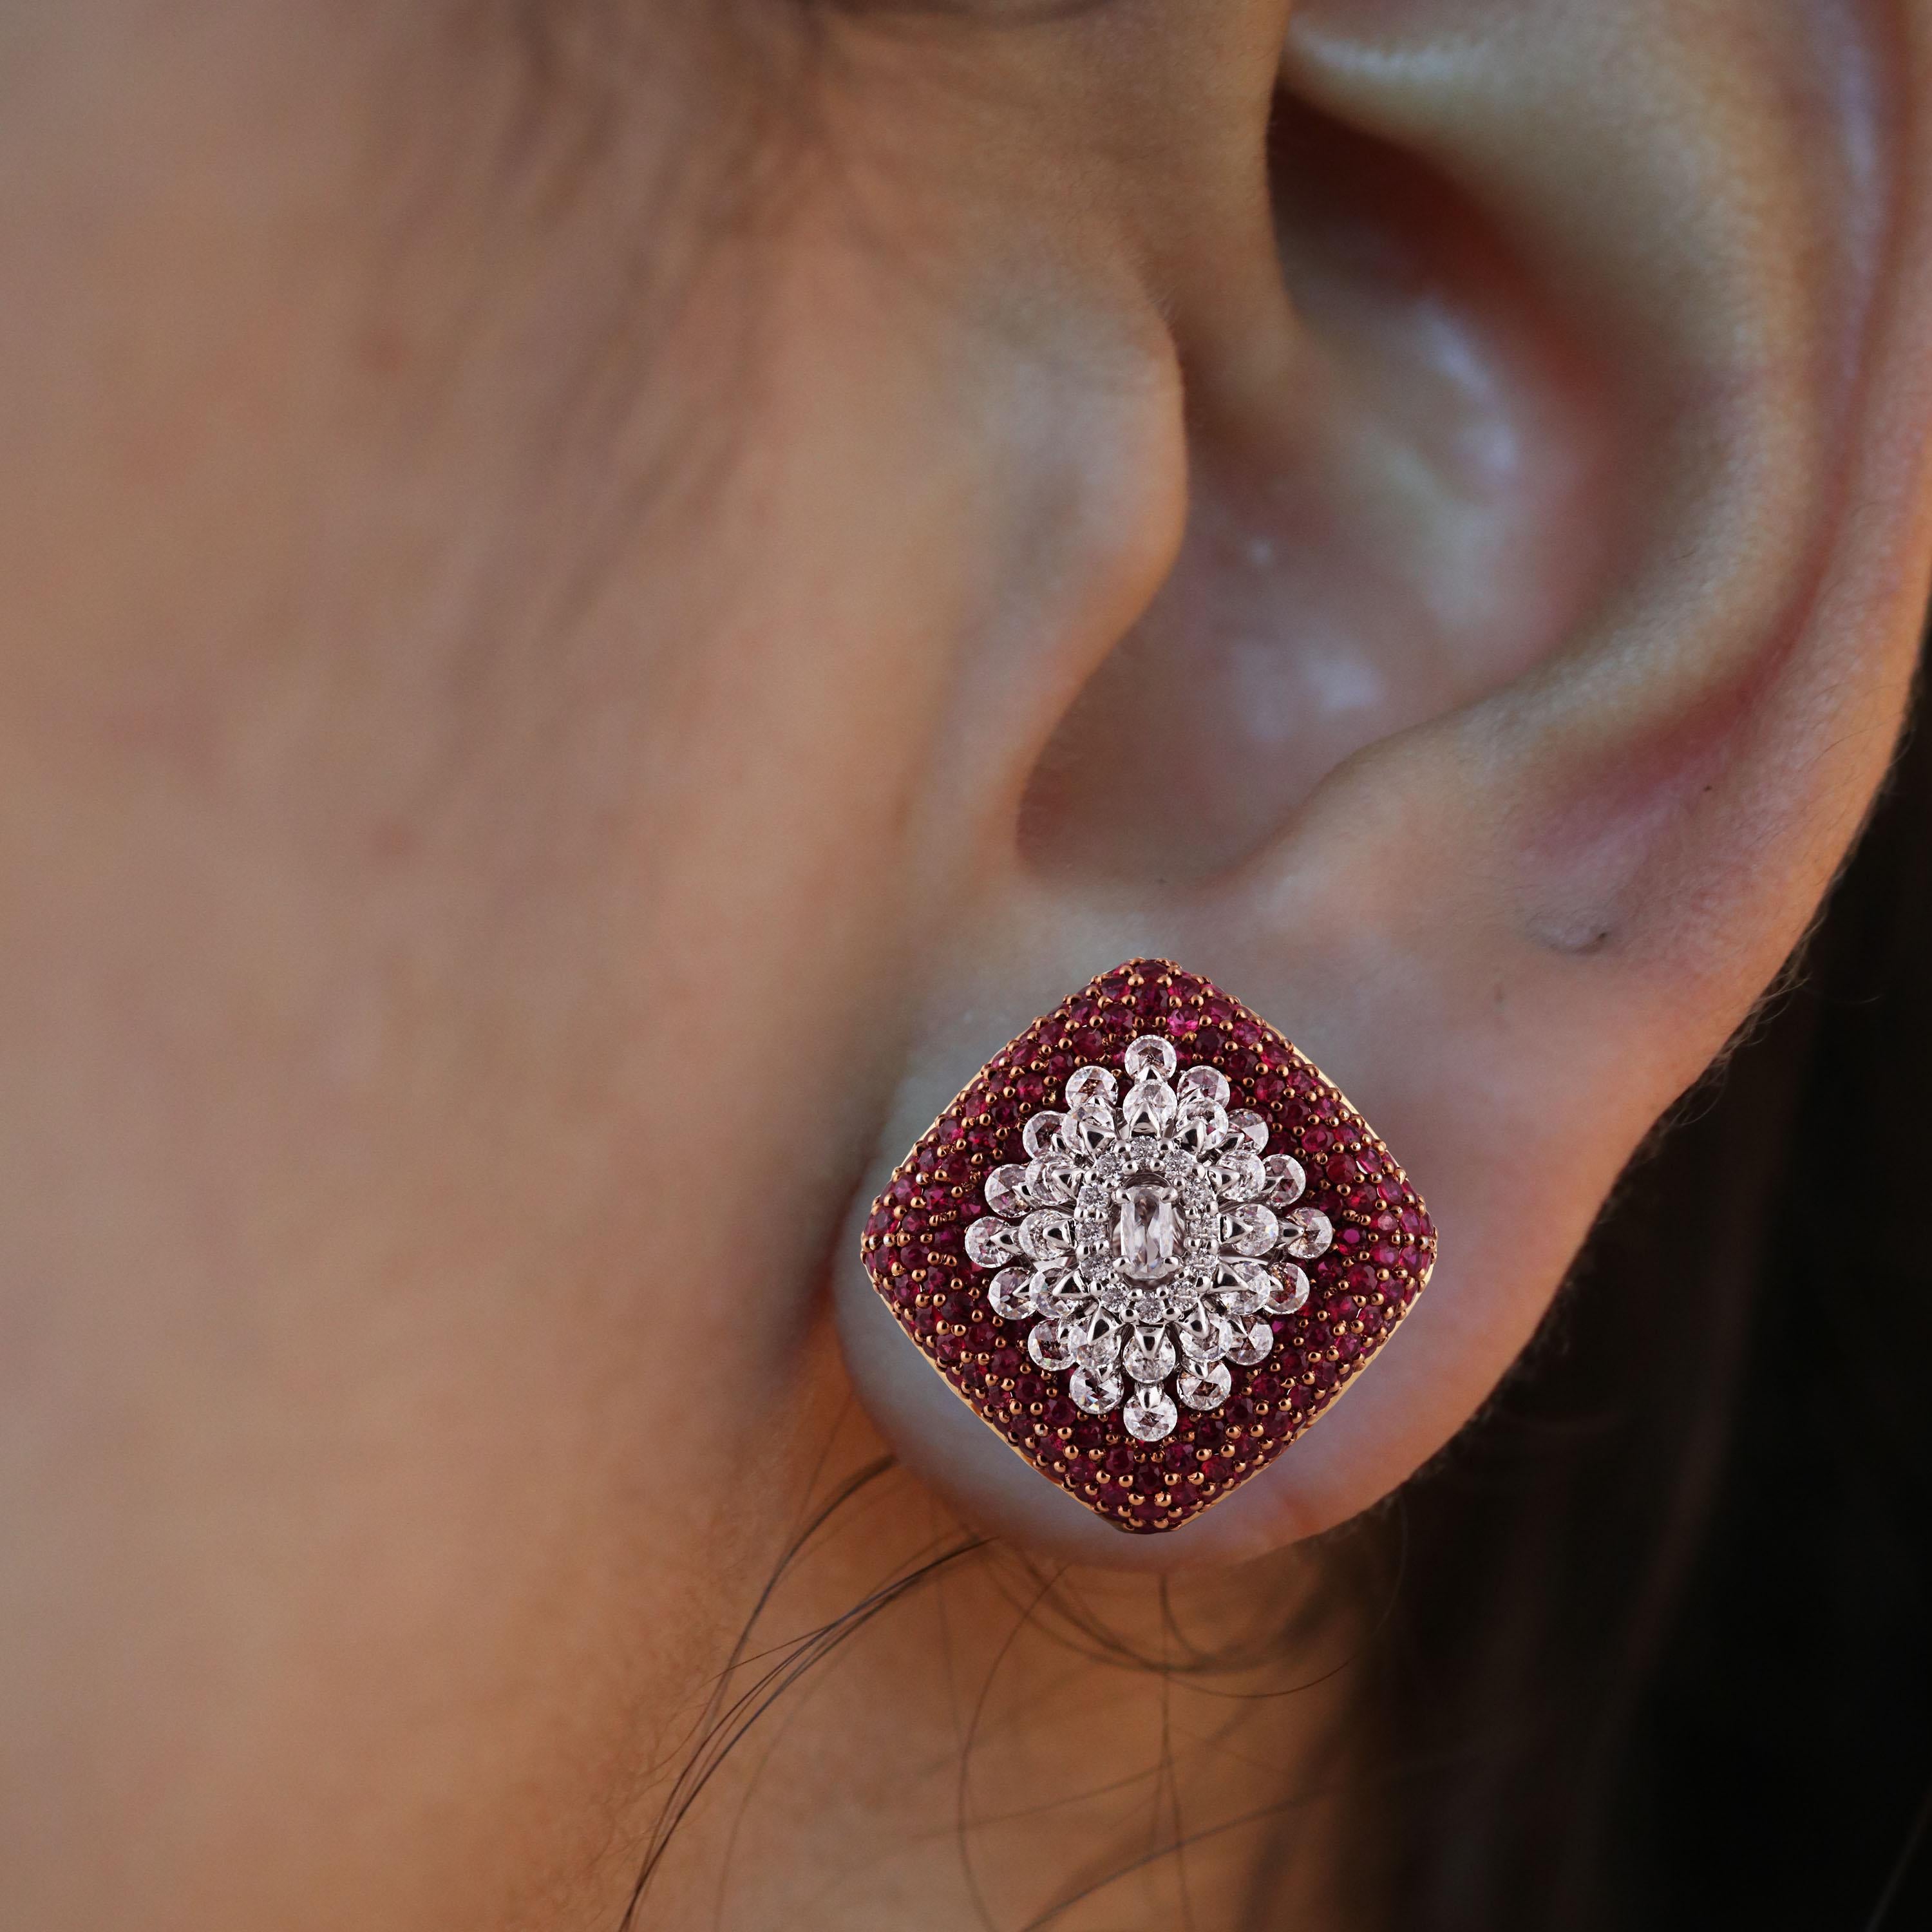 Gross Weight: 16.35 Grams
Diamond Weight: 1.40 cts
Ruby Weight: 3.41 cts
IGI Certification can be done on Request.

Video of the product can be shared on request.

An oval rose cut diamond is the eye catching center of these diamond snowflake stud